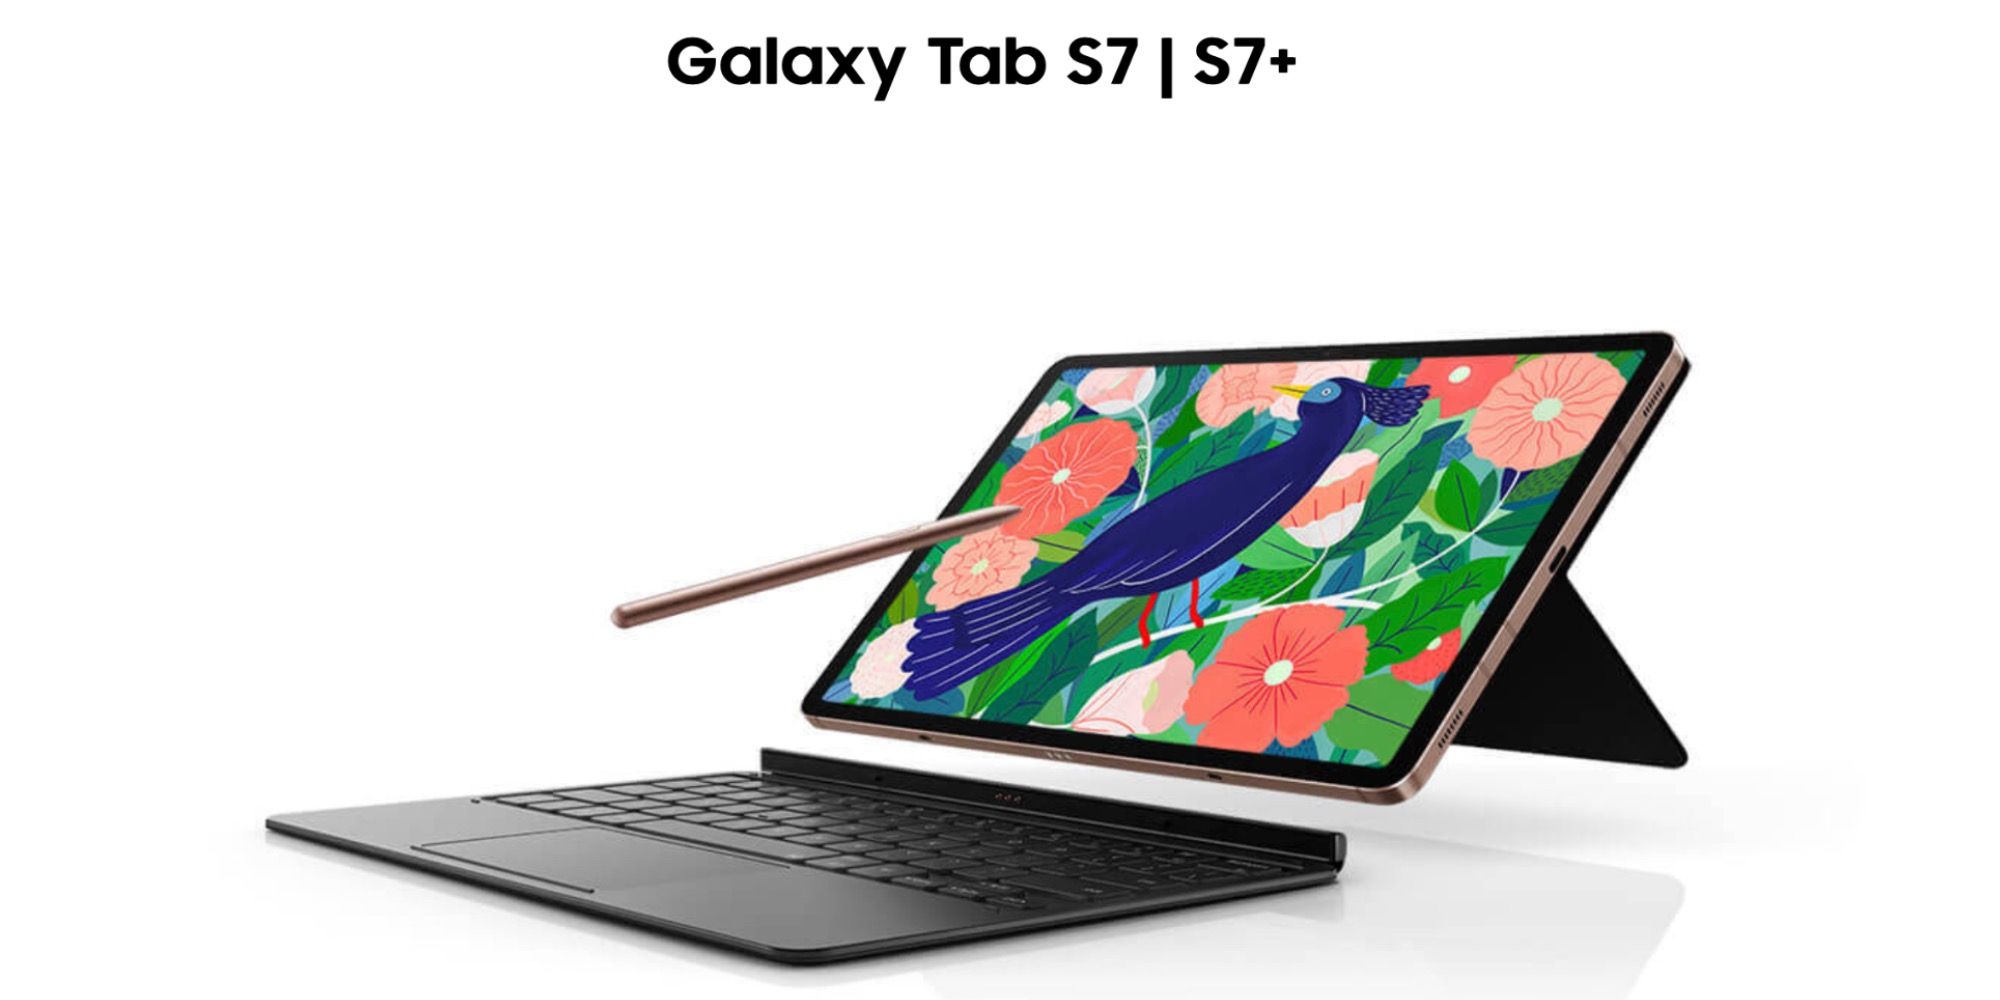 Galaxy Tab S7 & S7 Plus Samsungs Latest Tablets Feature 5G & 120Hz Displays